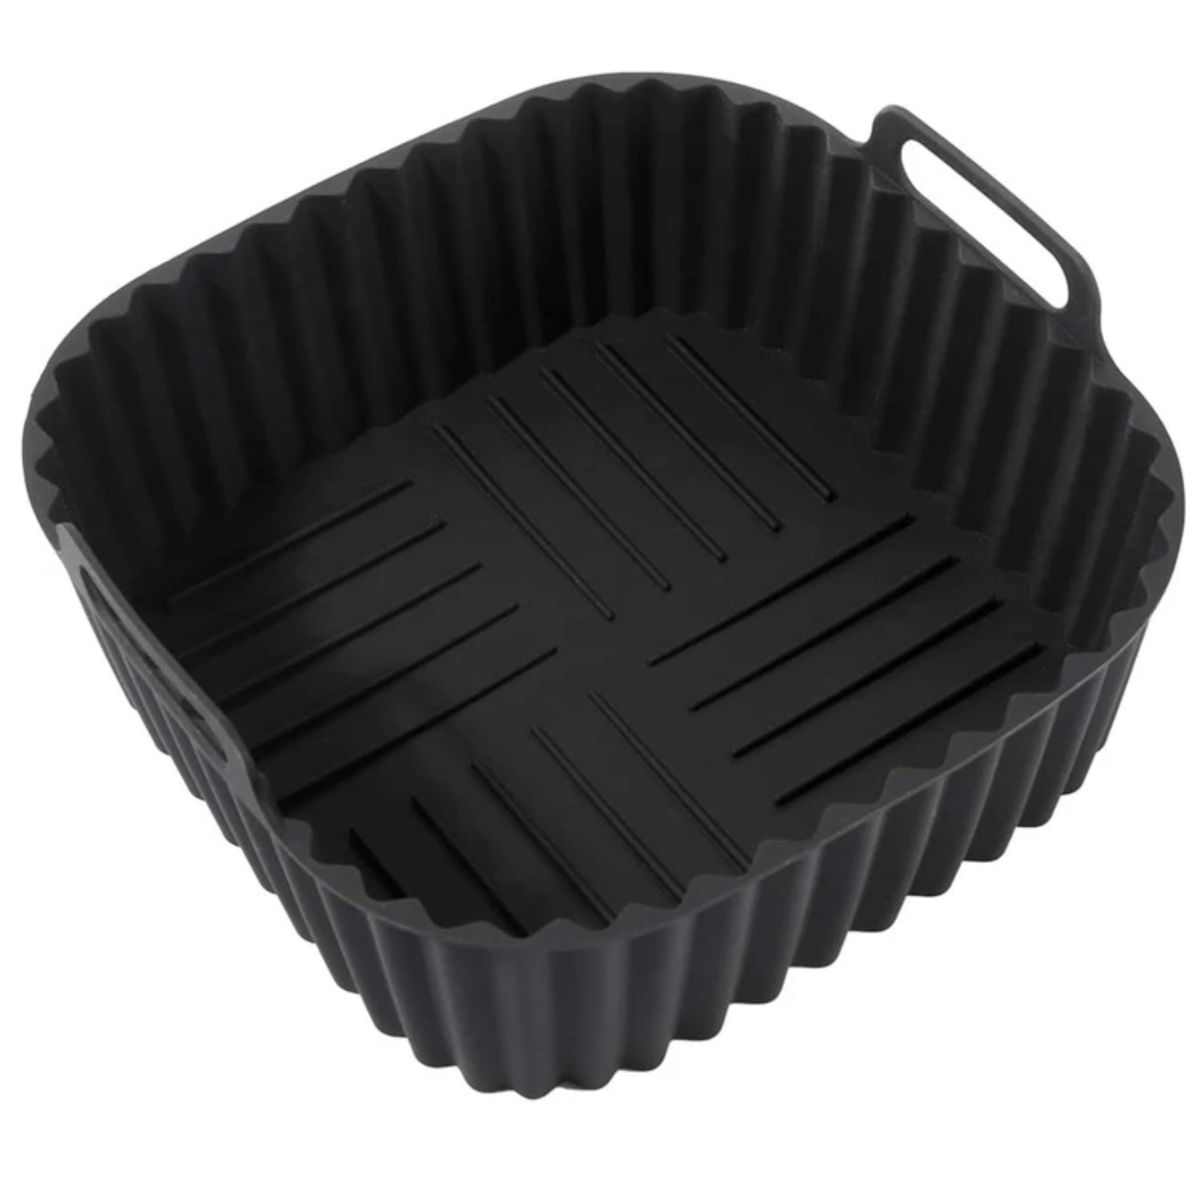 Re-usable Silicone Liner/Pot For Air Fryer Non-Stick Square | Shop ...